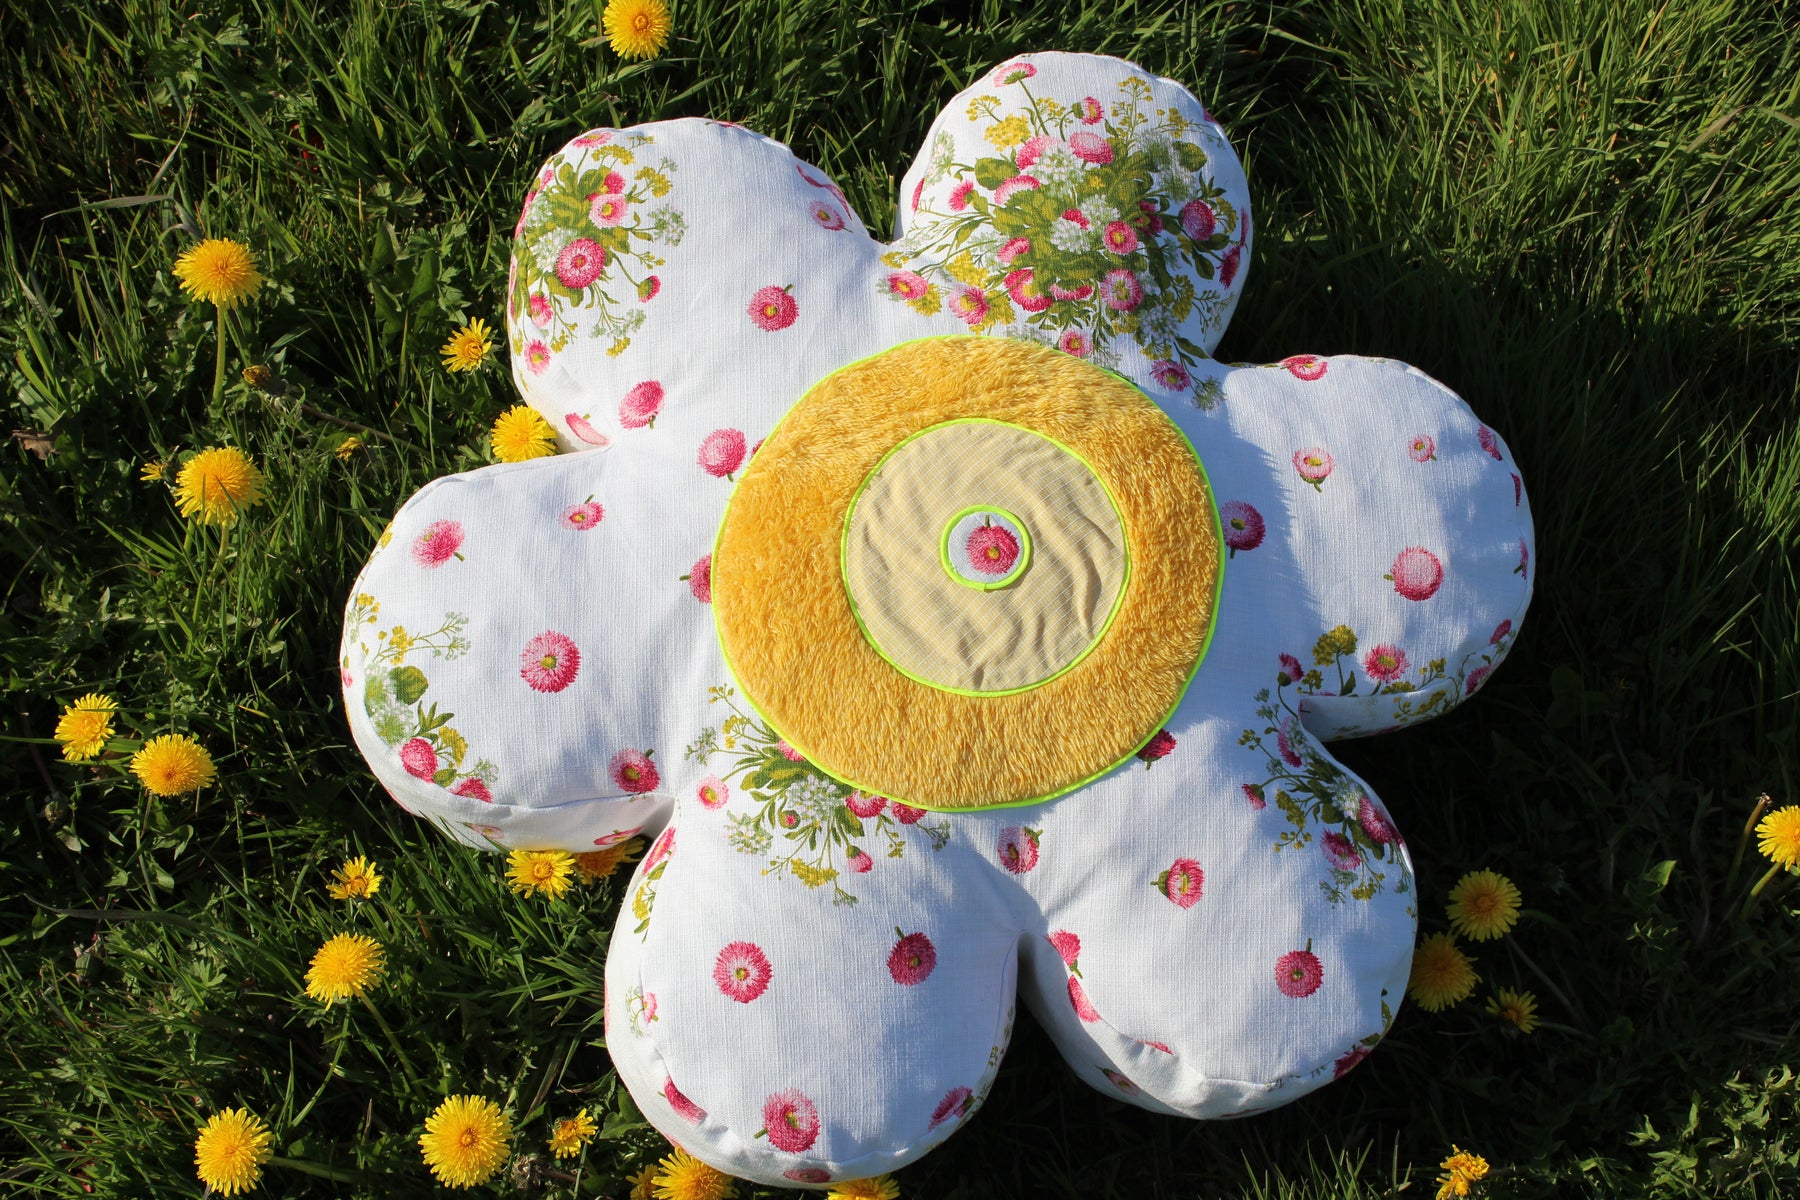 Planting Ideas Pillow — Project Kesher